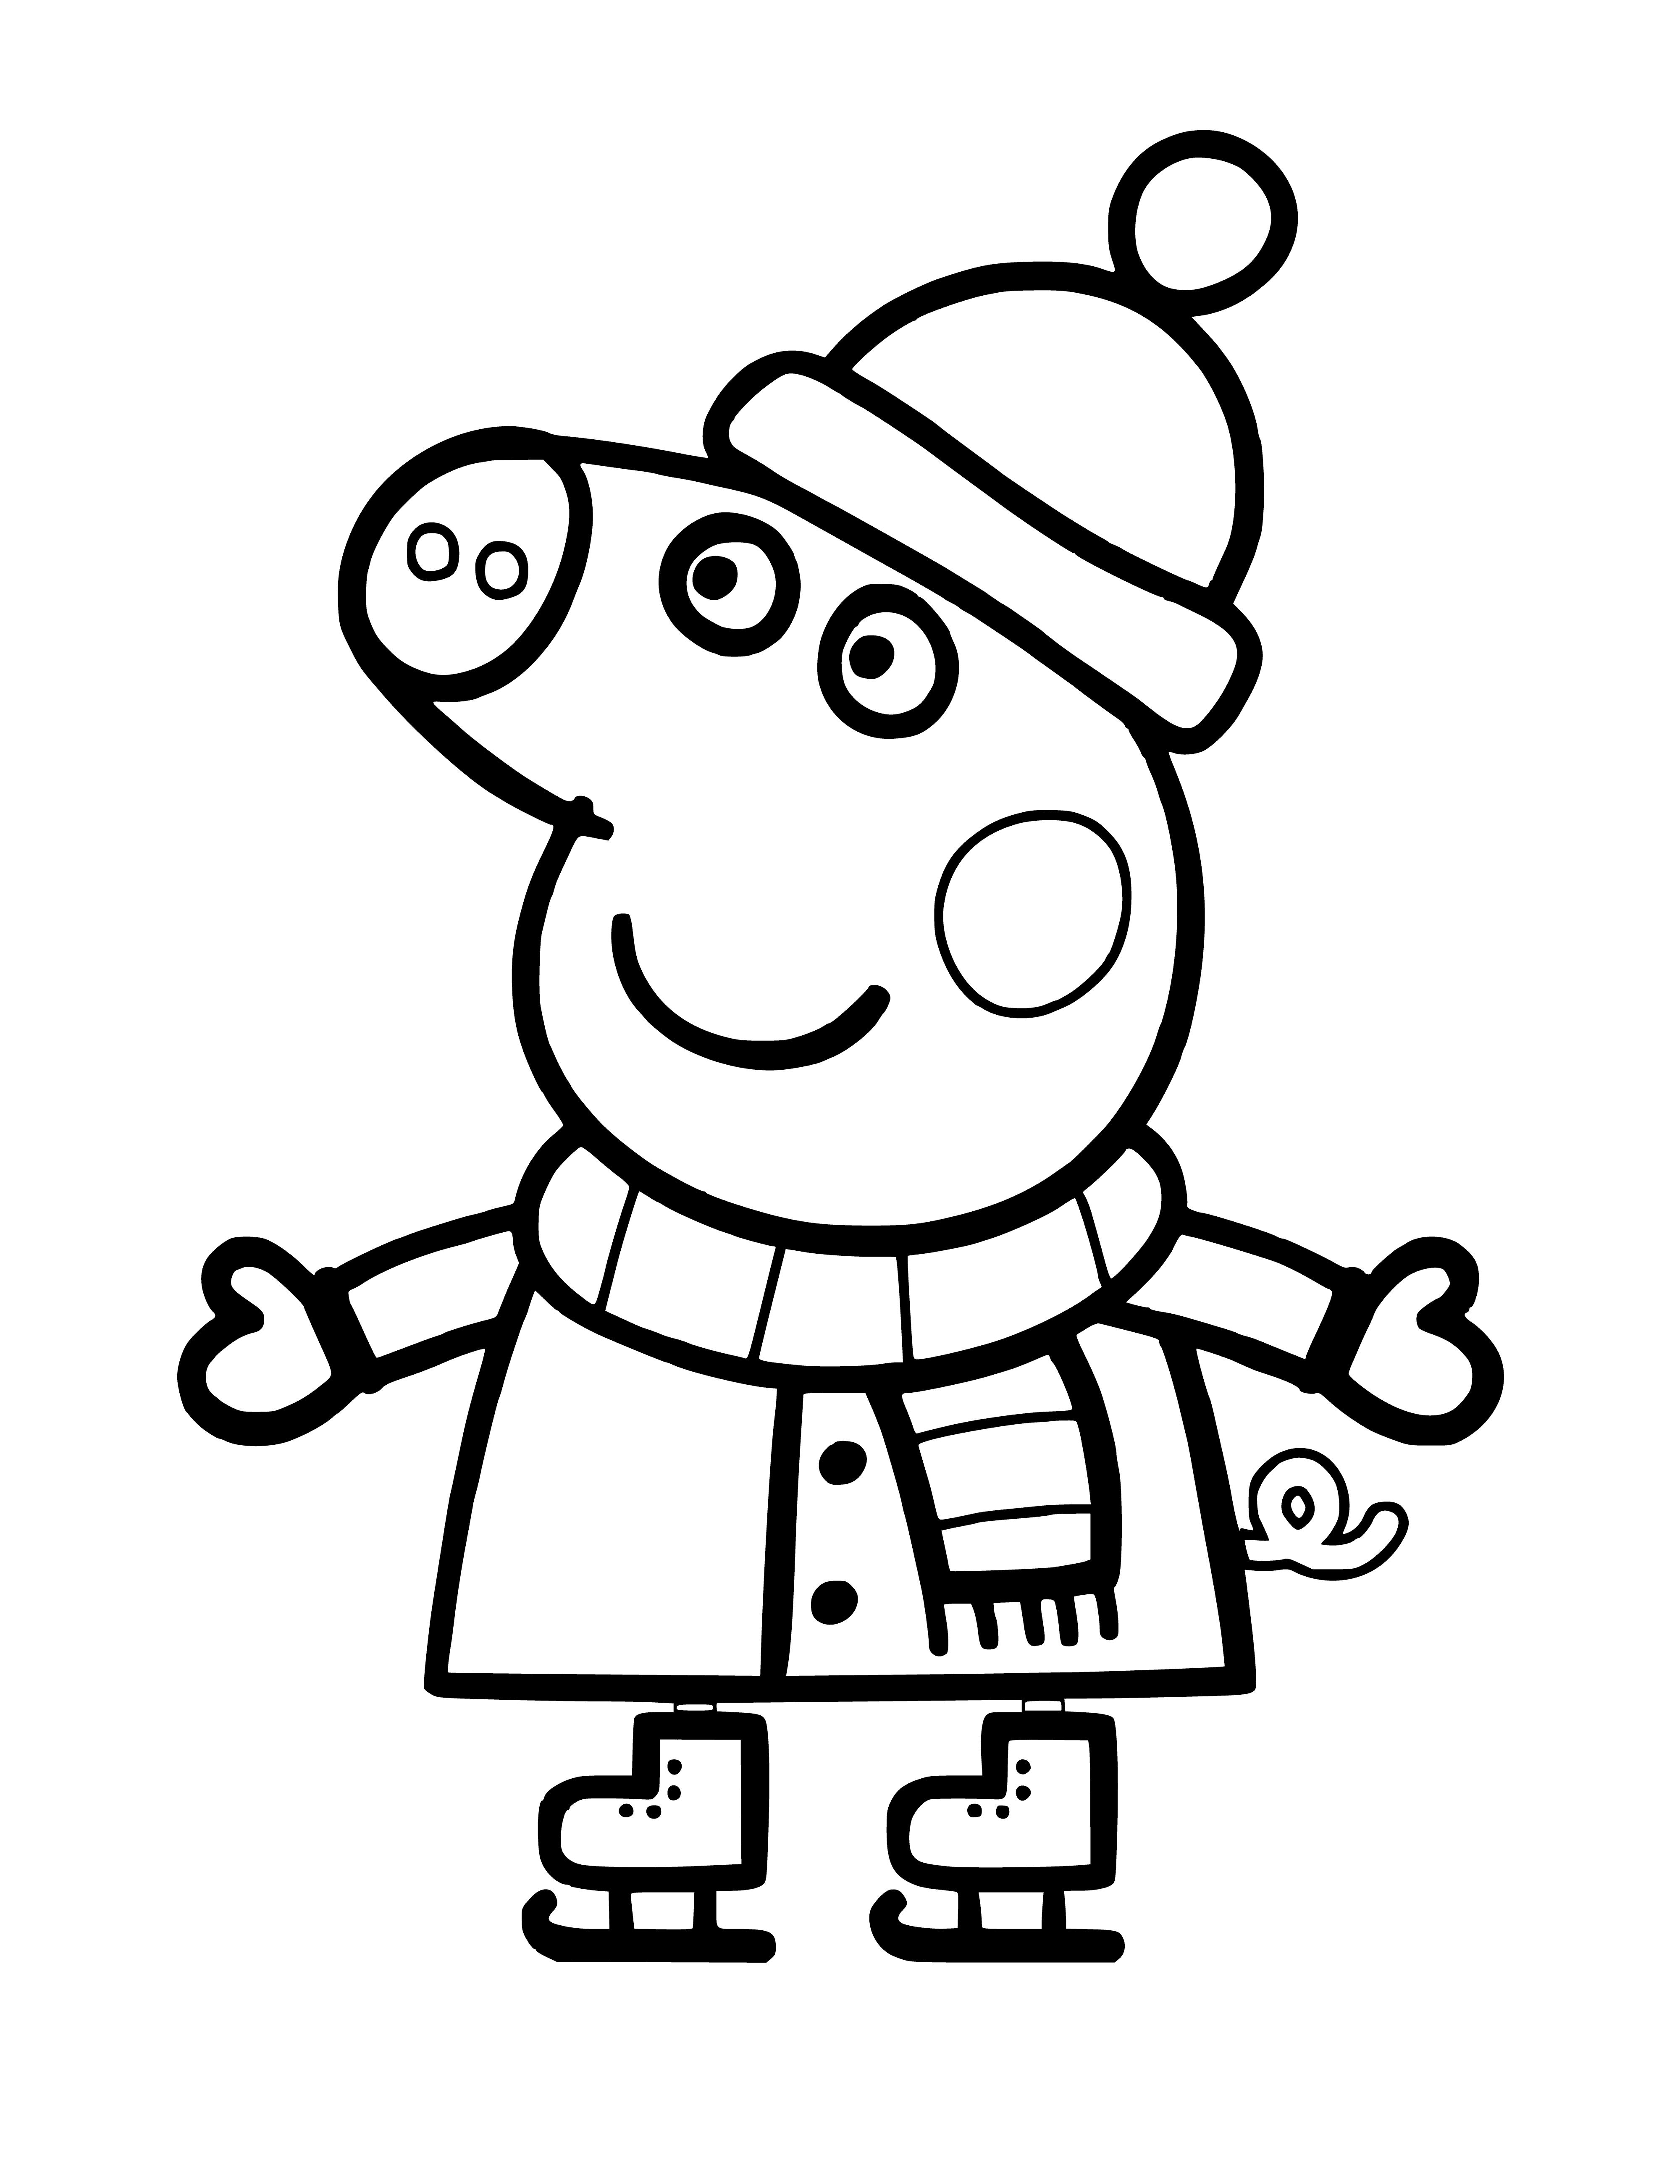 coloring page: Peppa & George ice skate, holding hands, smiling happily.